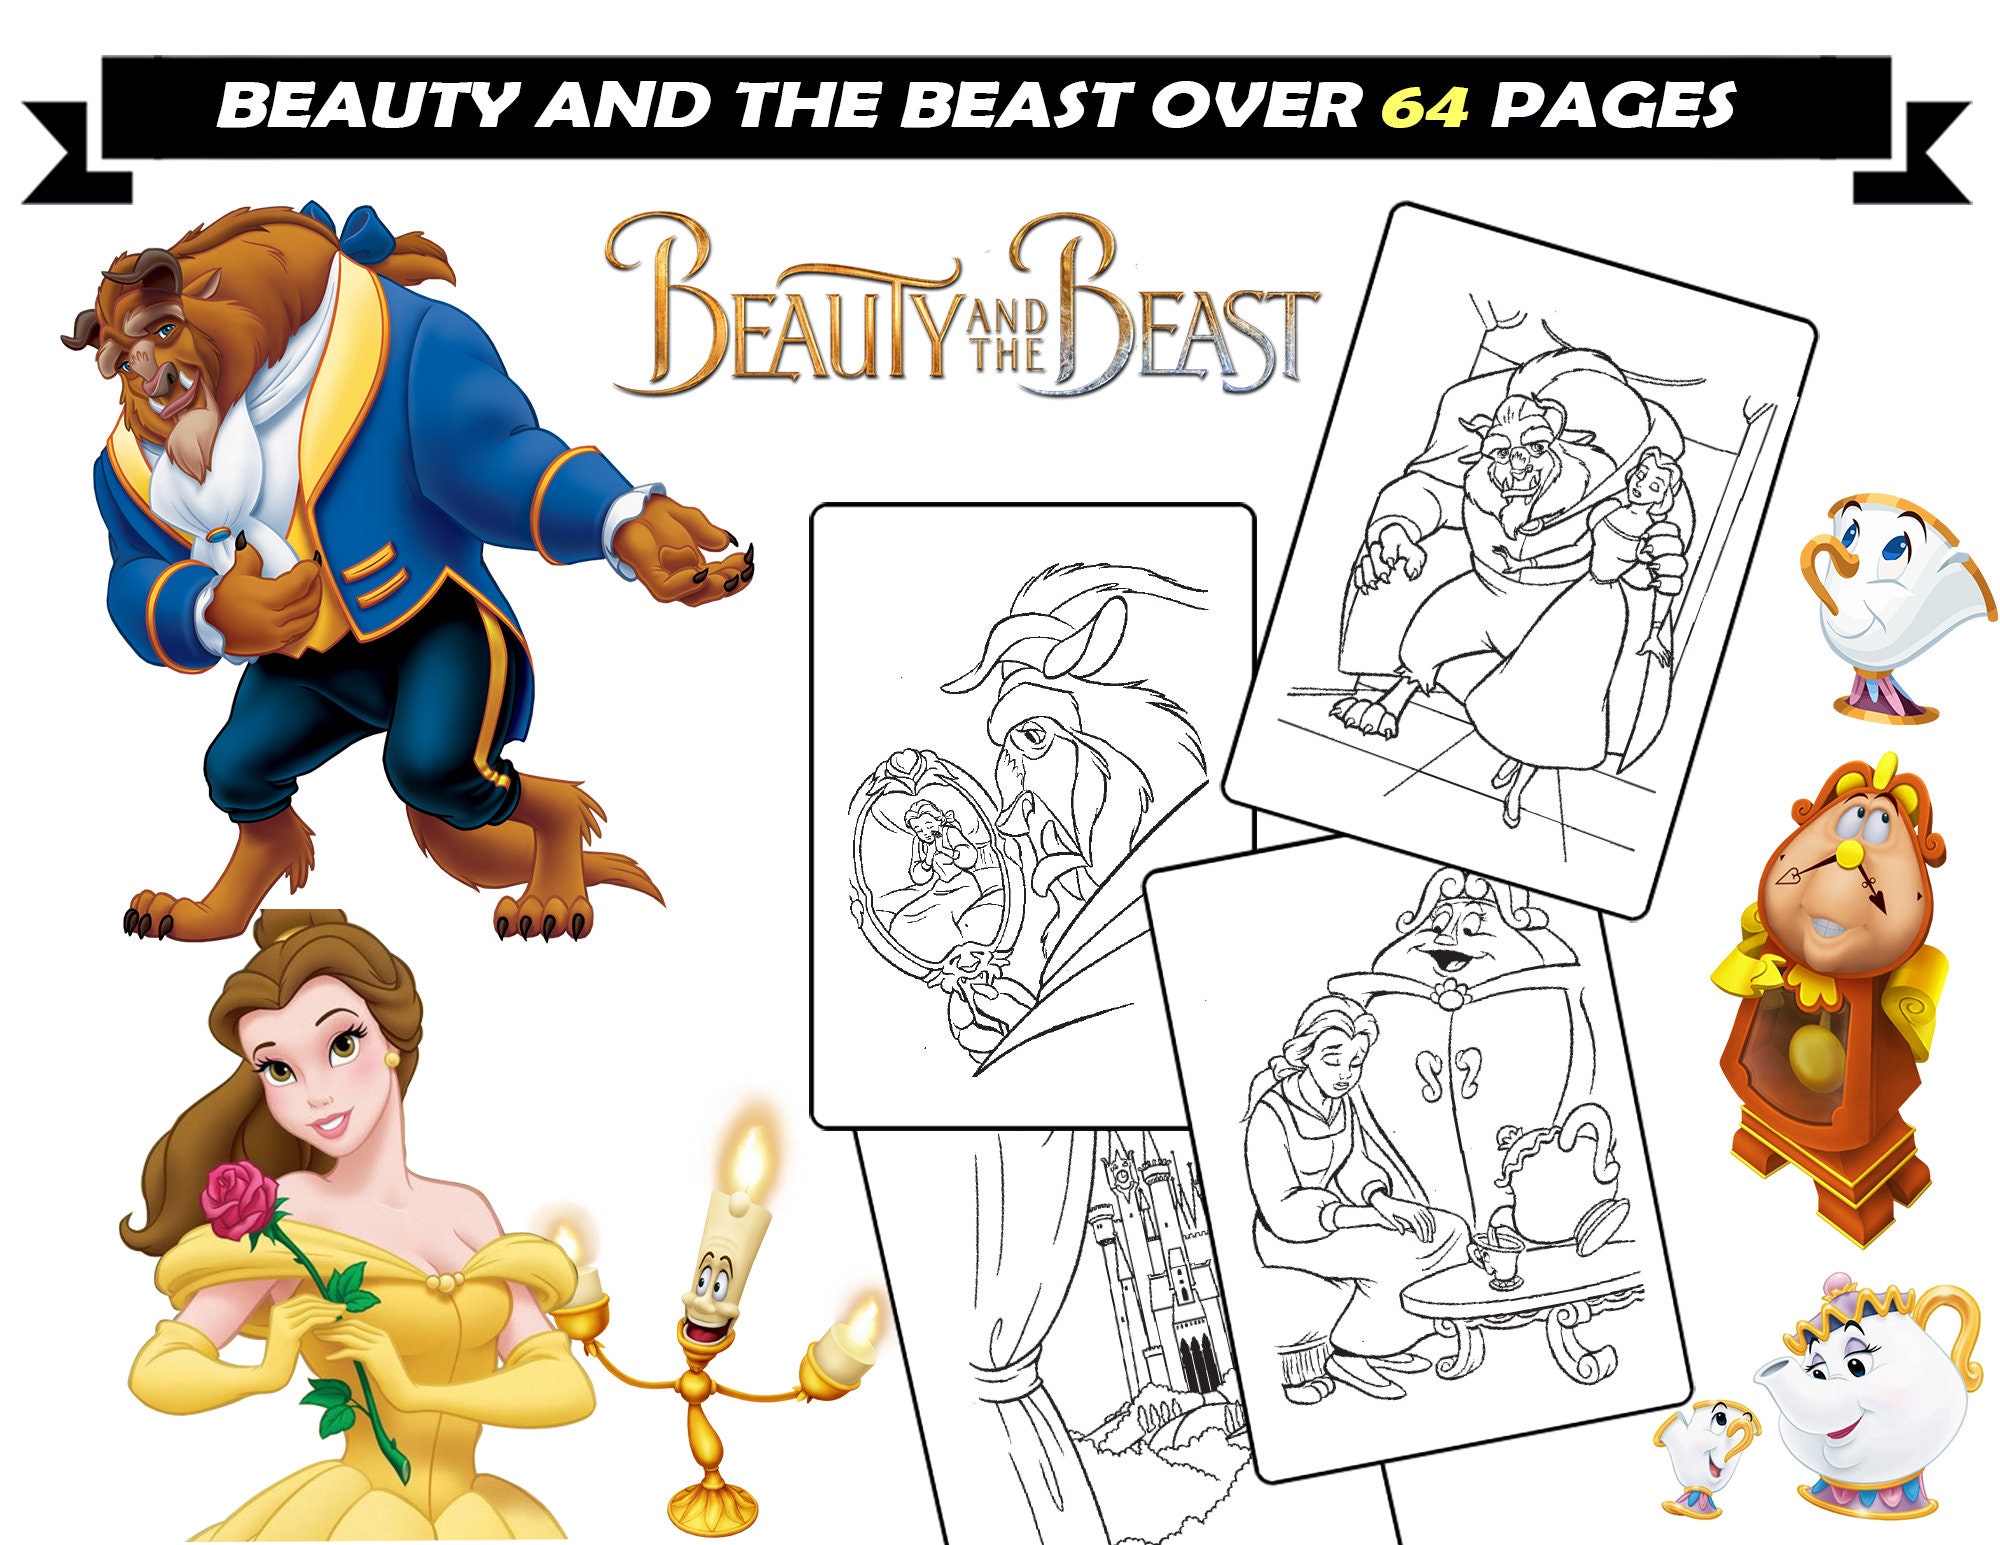 Beauty and the beast coloring pages for girls belle beast cartoon characters printable coloring book instant download coloring sheets